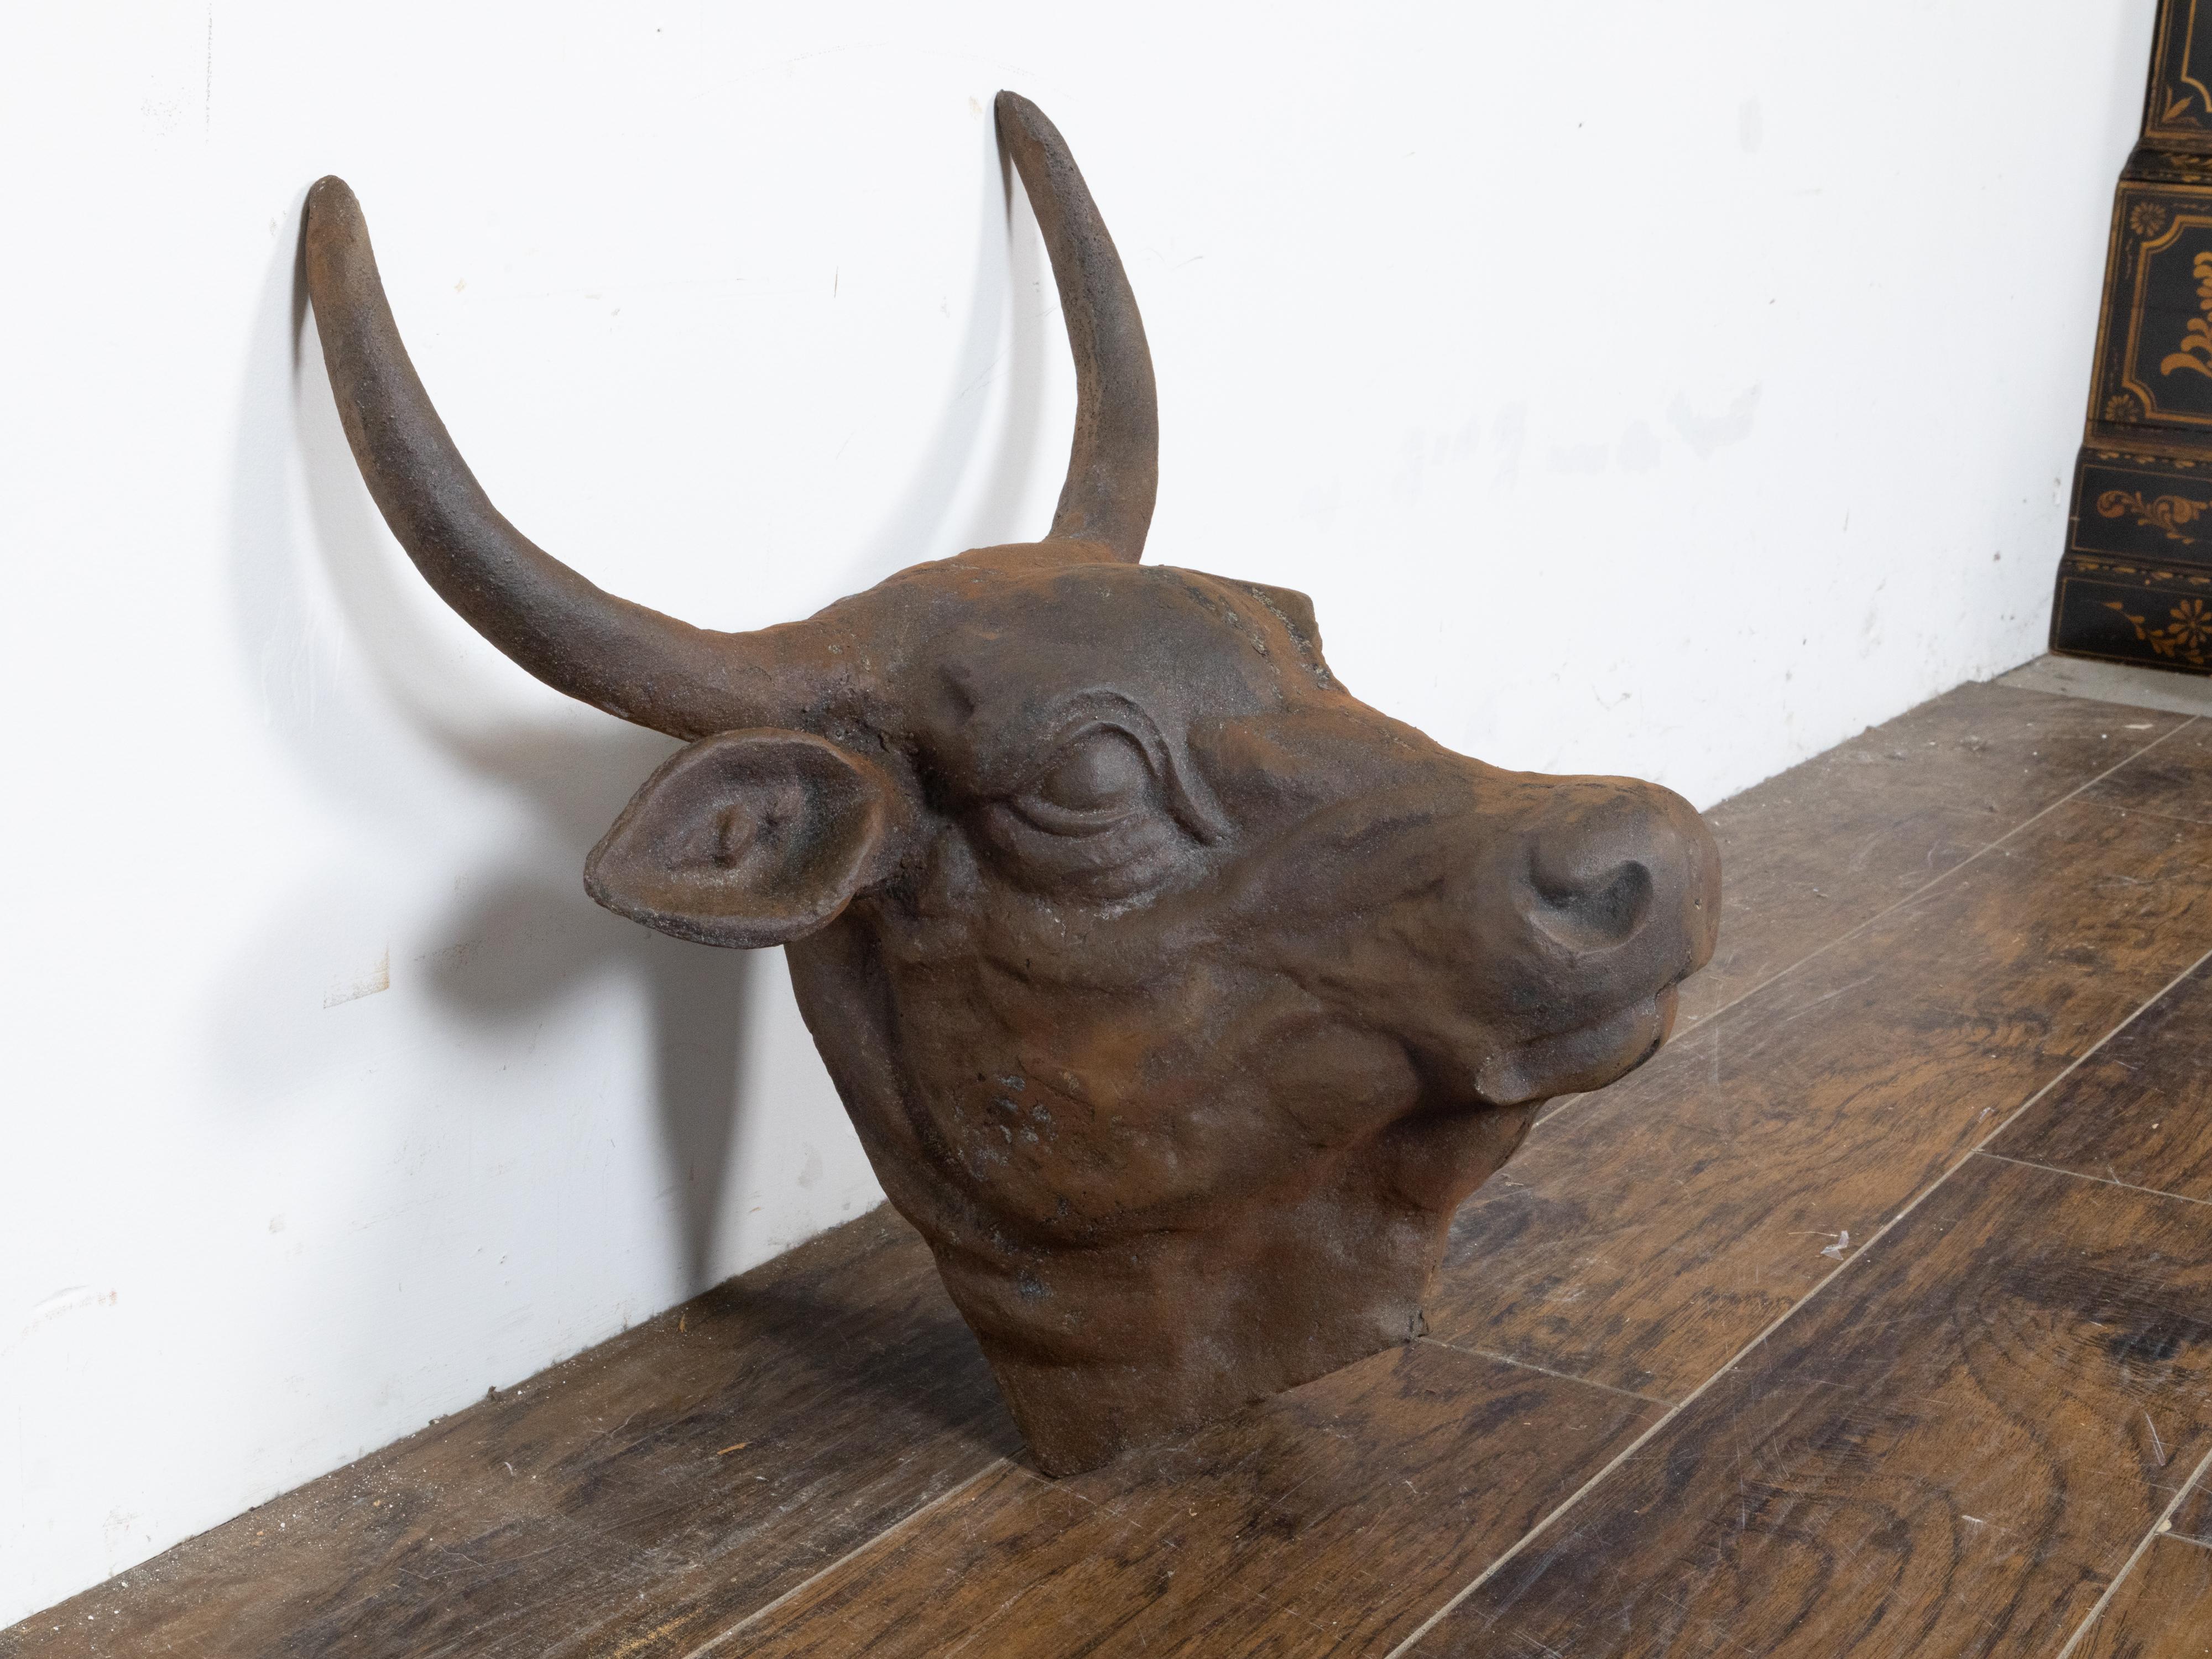 English 1930s-1940s Cast Iron Bull Wall Hanging Sculpture with Rusty Patina For Sale 3